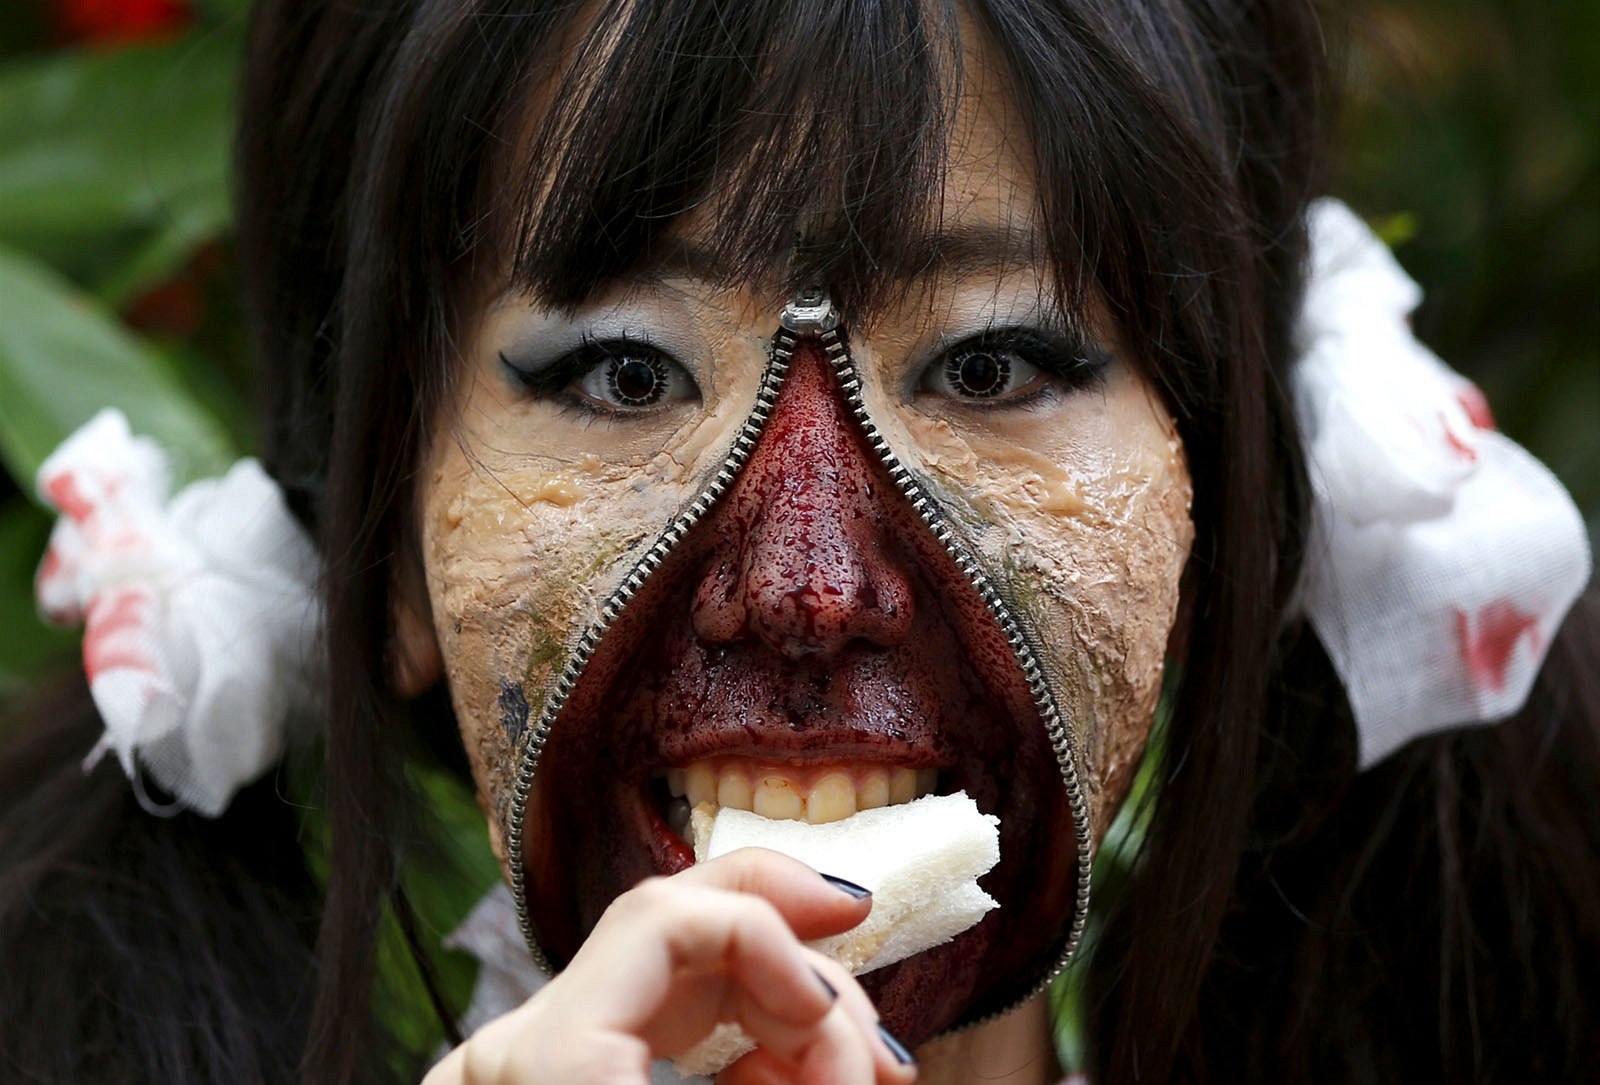 A participant eats a sandwich after a costume competition in Tokyo. More than 100,000 spectators turned up to watch the event.